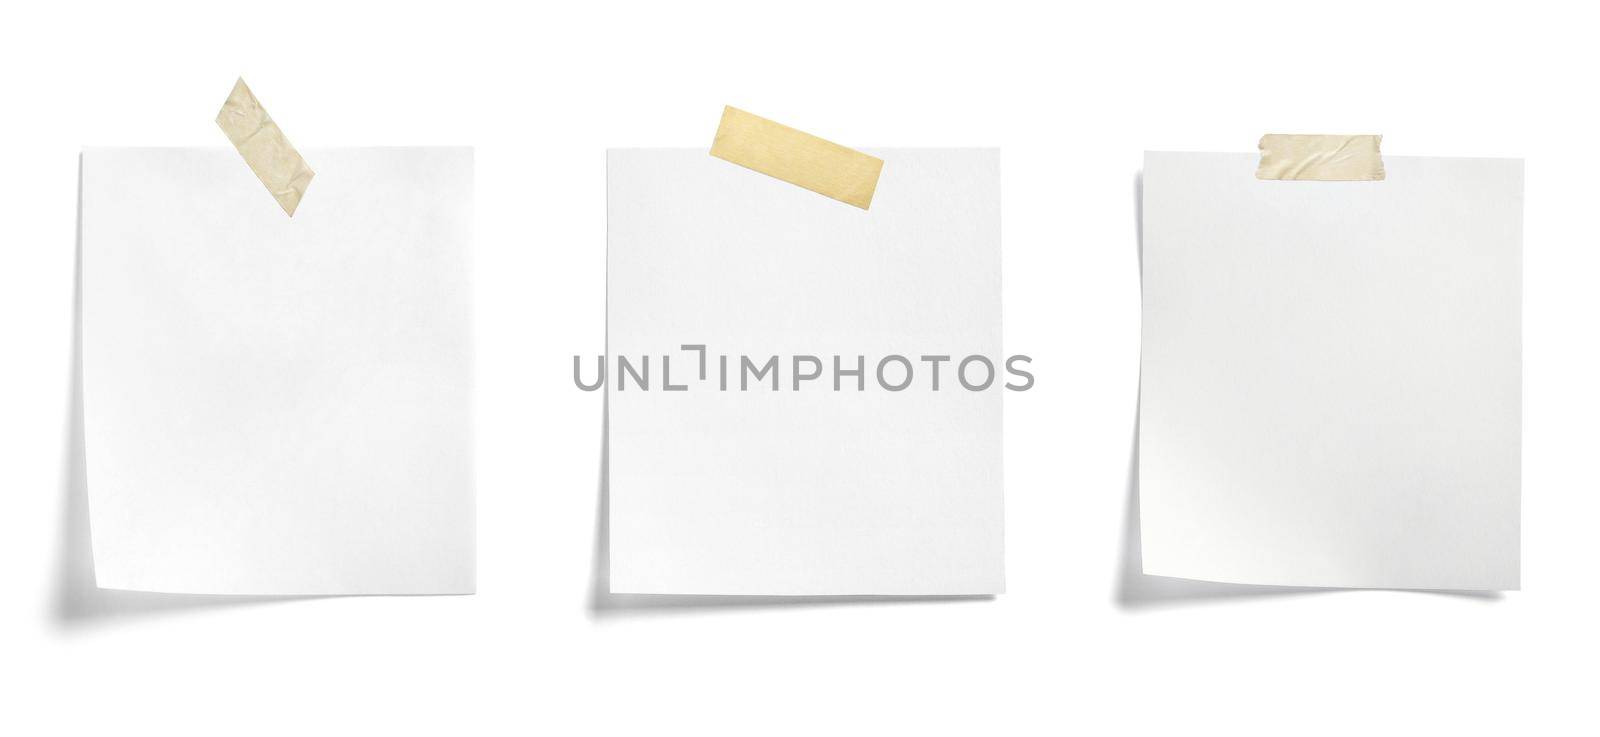 close up of a note paper with adhesive tape on white background